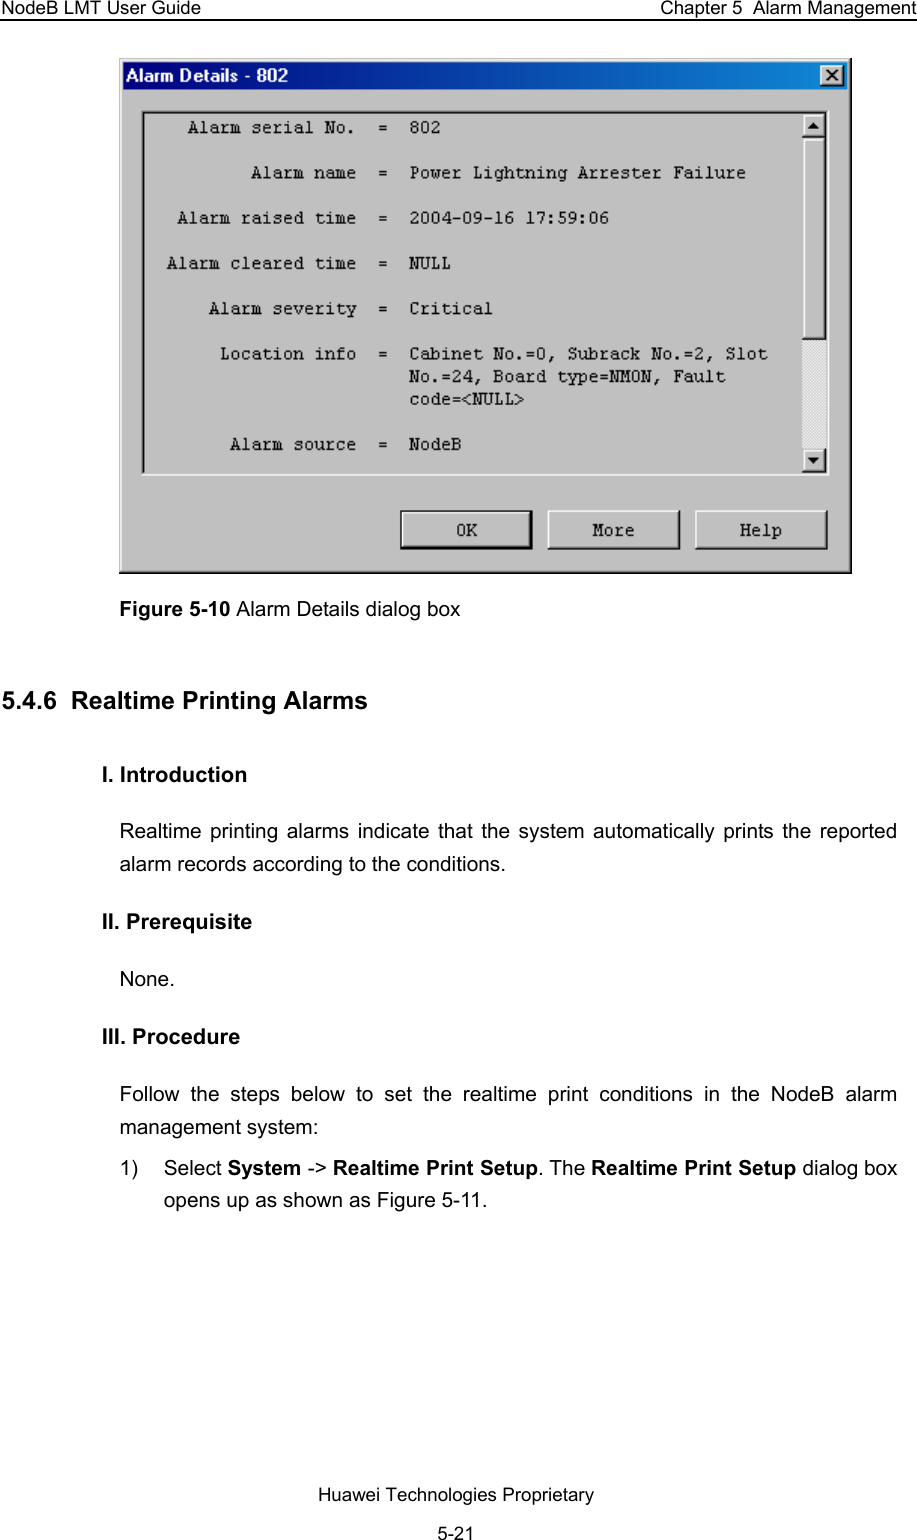 NodeB LMT User Guide  Chapter 5  Alarm Management  Figure 5-10 Alarm Details dialog box 5.4.6  Realtime Printing Alarms  I. Introduction Realtime printing alarms indicate that the system automatically prints the reported alarm records according to the conditions.  II. Prerequisite None.  III. Procedure Follow the steps below to set the realtime print conditions in the NodeB alarm management system:  1) Select System -&gt; Realtime Print Setup. The Realtime Print Setup dialog box opens up as shown as Figure 5-11.  Huawei Technologies Proprietary 5-21 